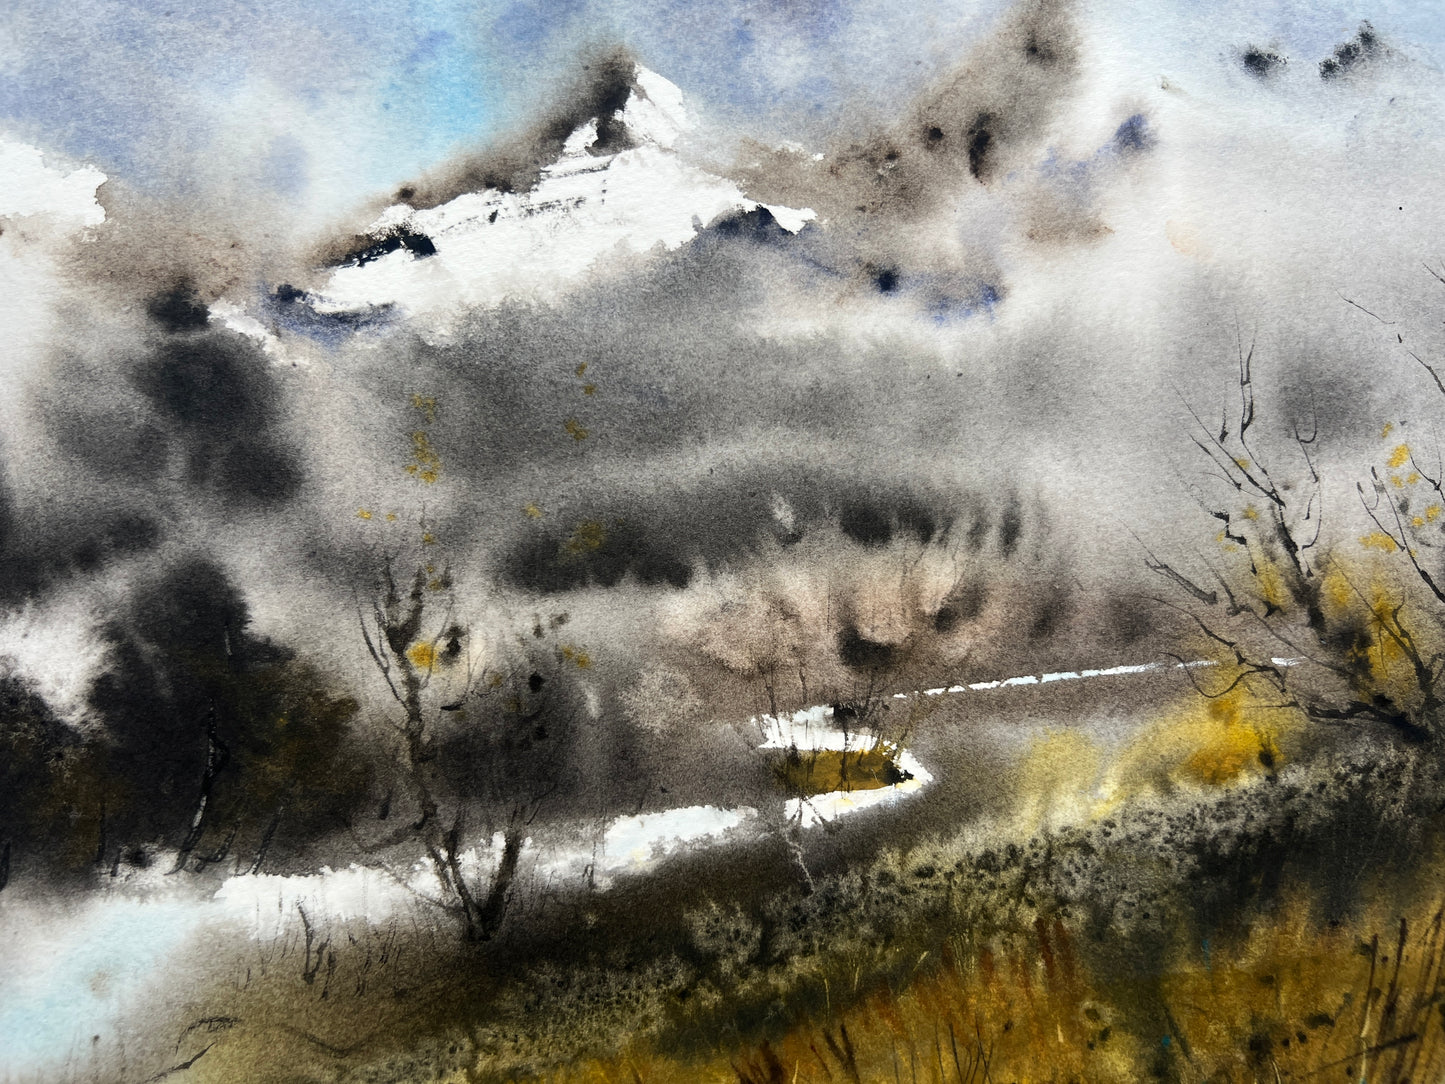 Abstract Mountain Painting Watercolour Original, Contemporary Art, Mountains, Wall Decor, Modern Landscape With River